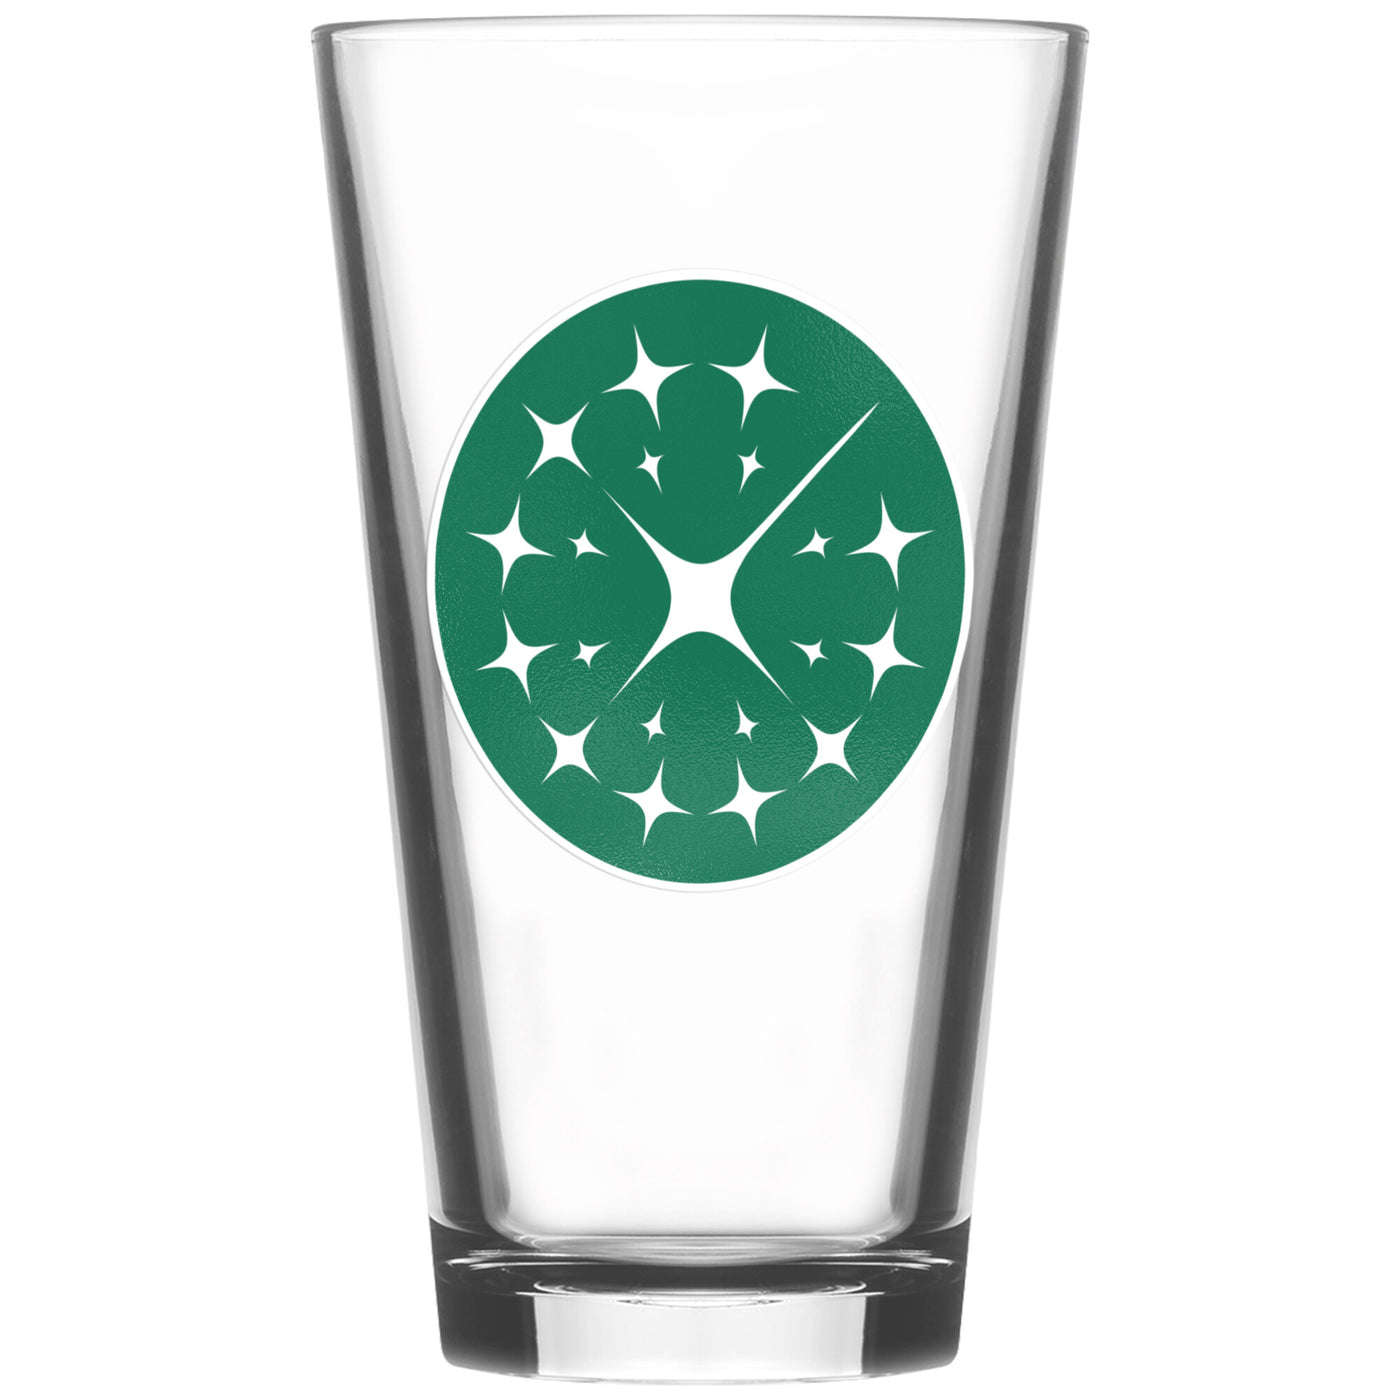 Antares Confederacy | Standard Issue Pint Glass